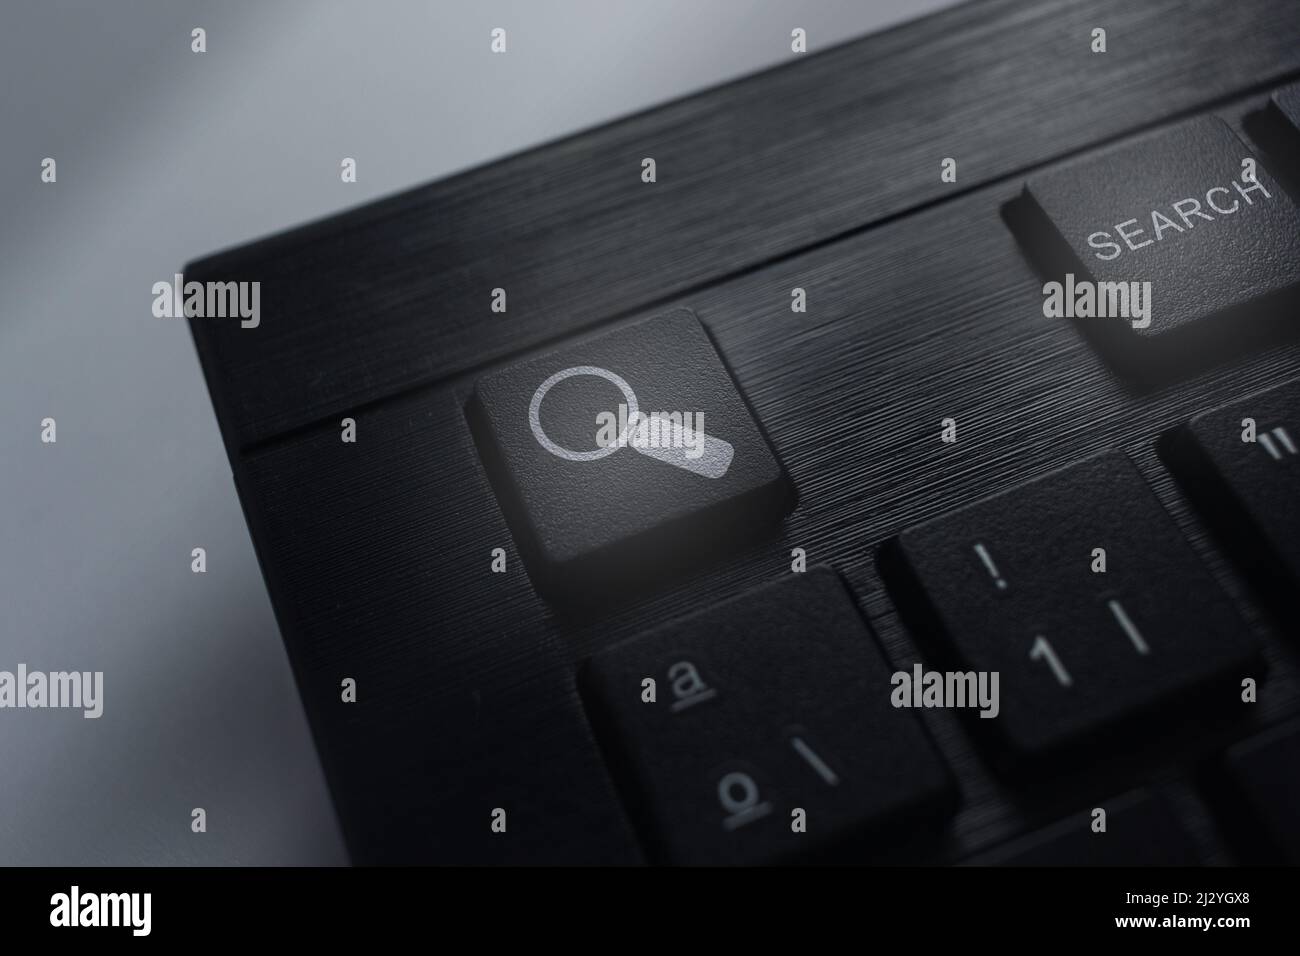 Keyboard with search button. Concept of searching browsing Internet data information. Stock Photo